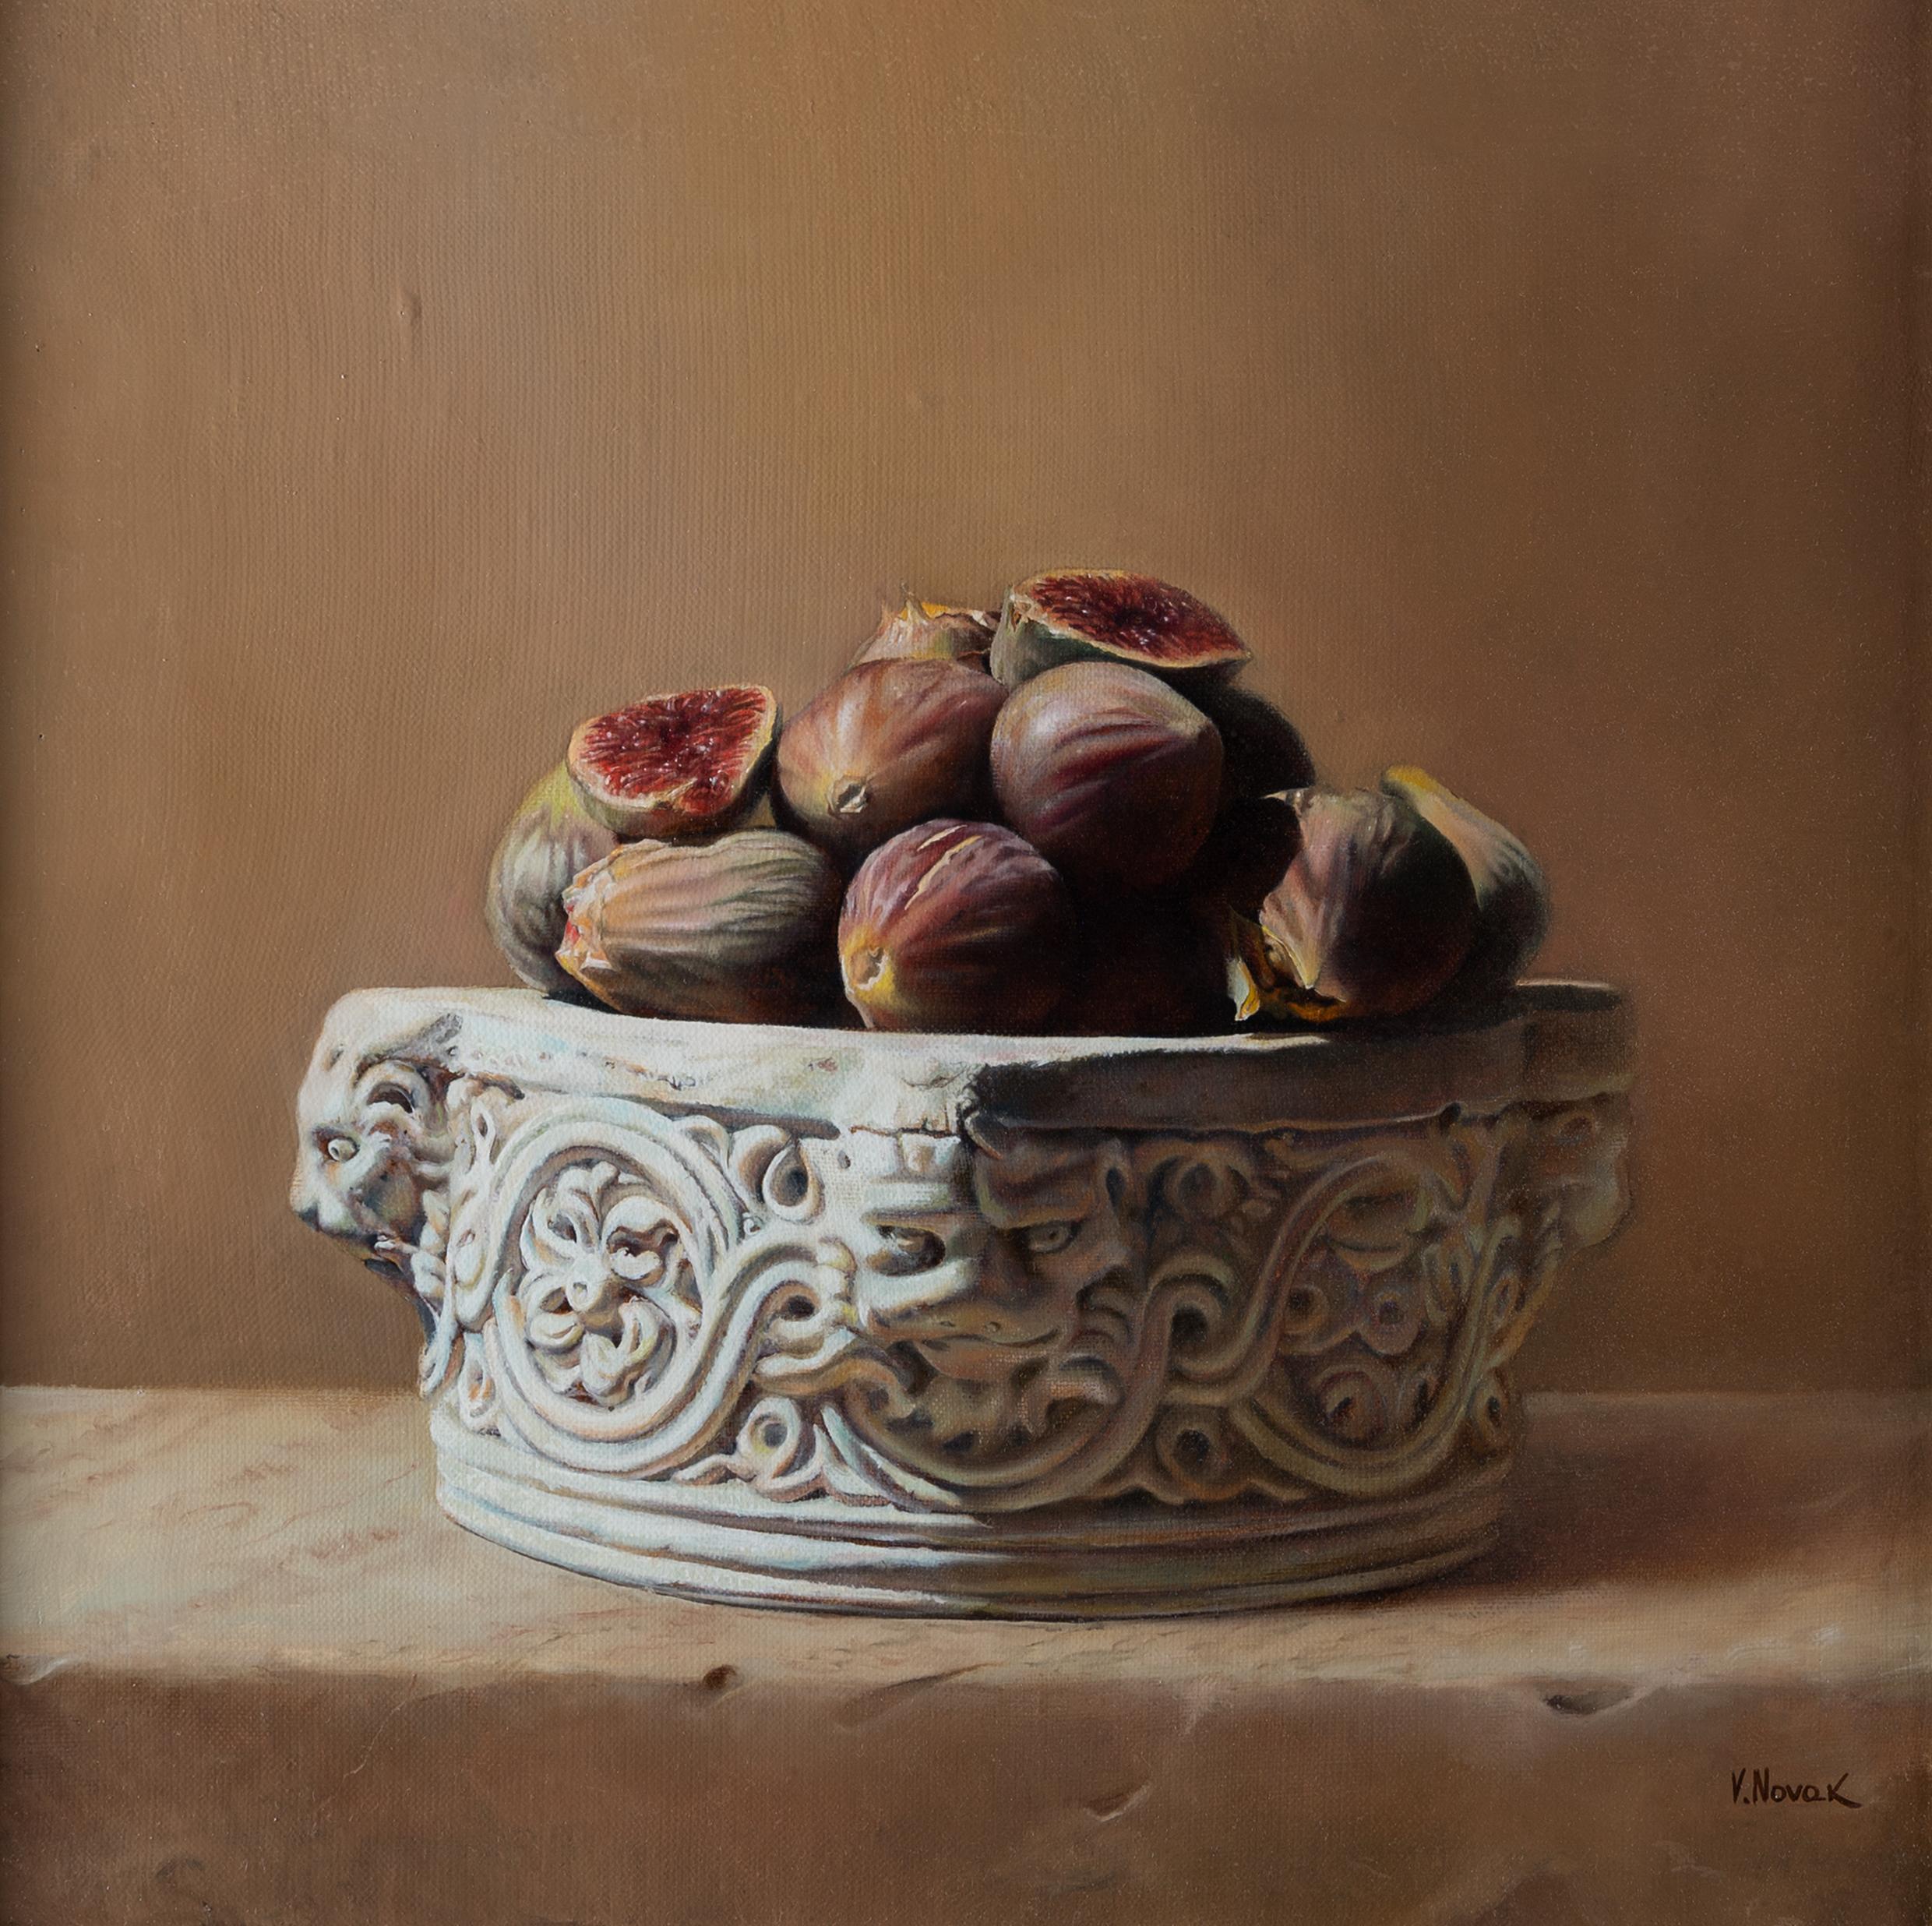 Victoria Novak Still-Life Painting - "Umbria" Ornate Bowl with Figs Still Life Oil Painting